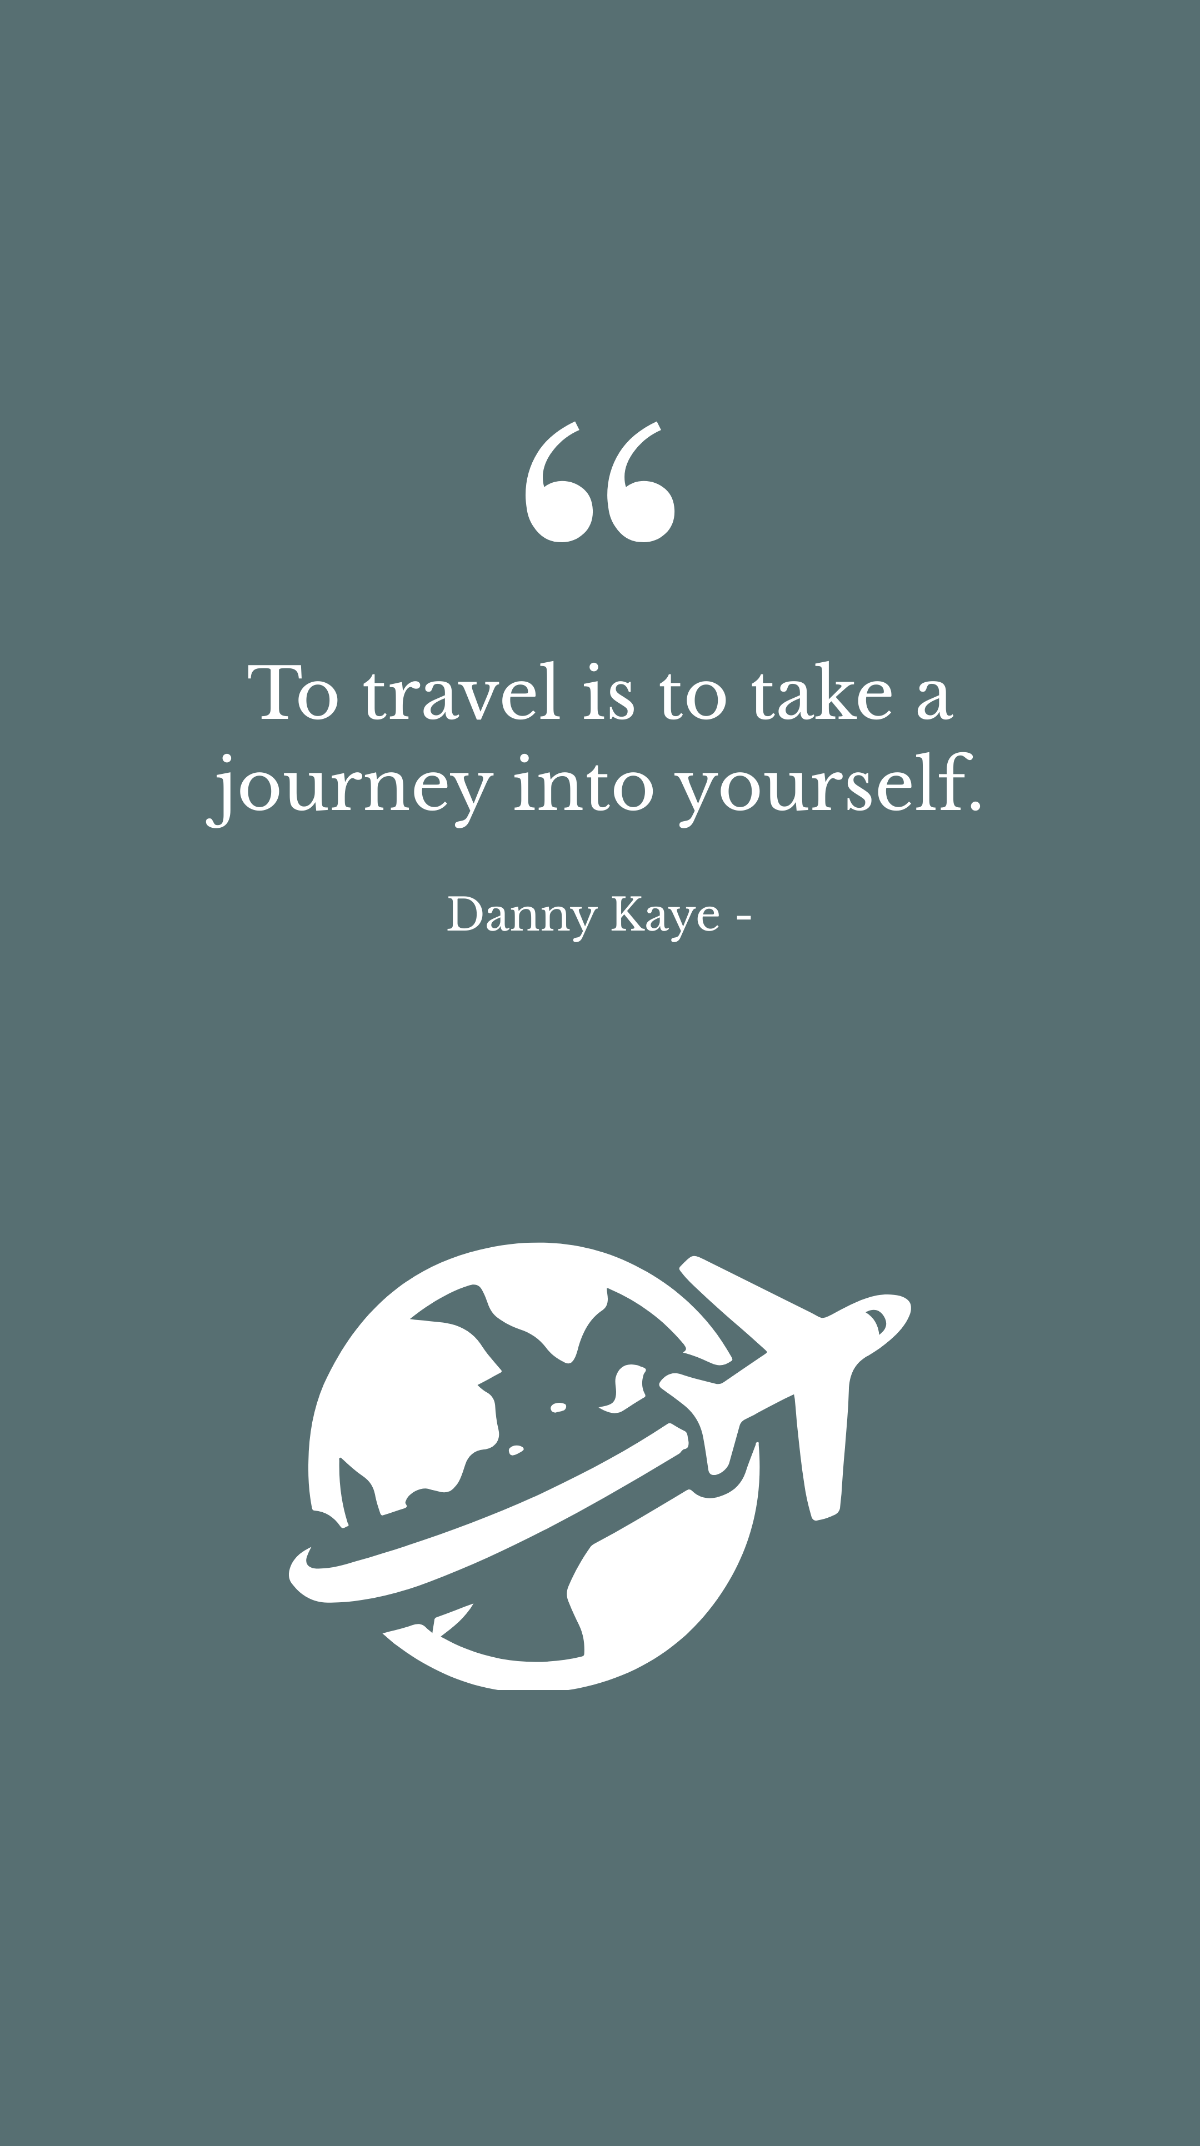 Free Danny Kaye - To travel is to take a journey into yourself. Template